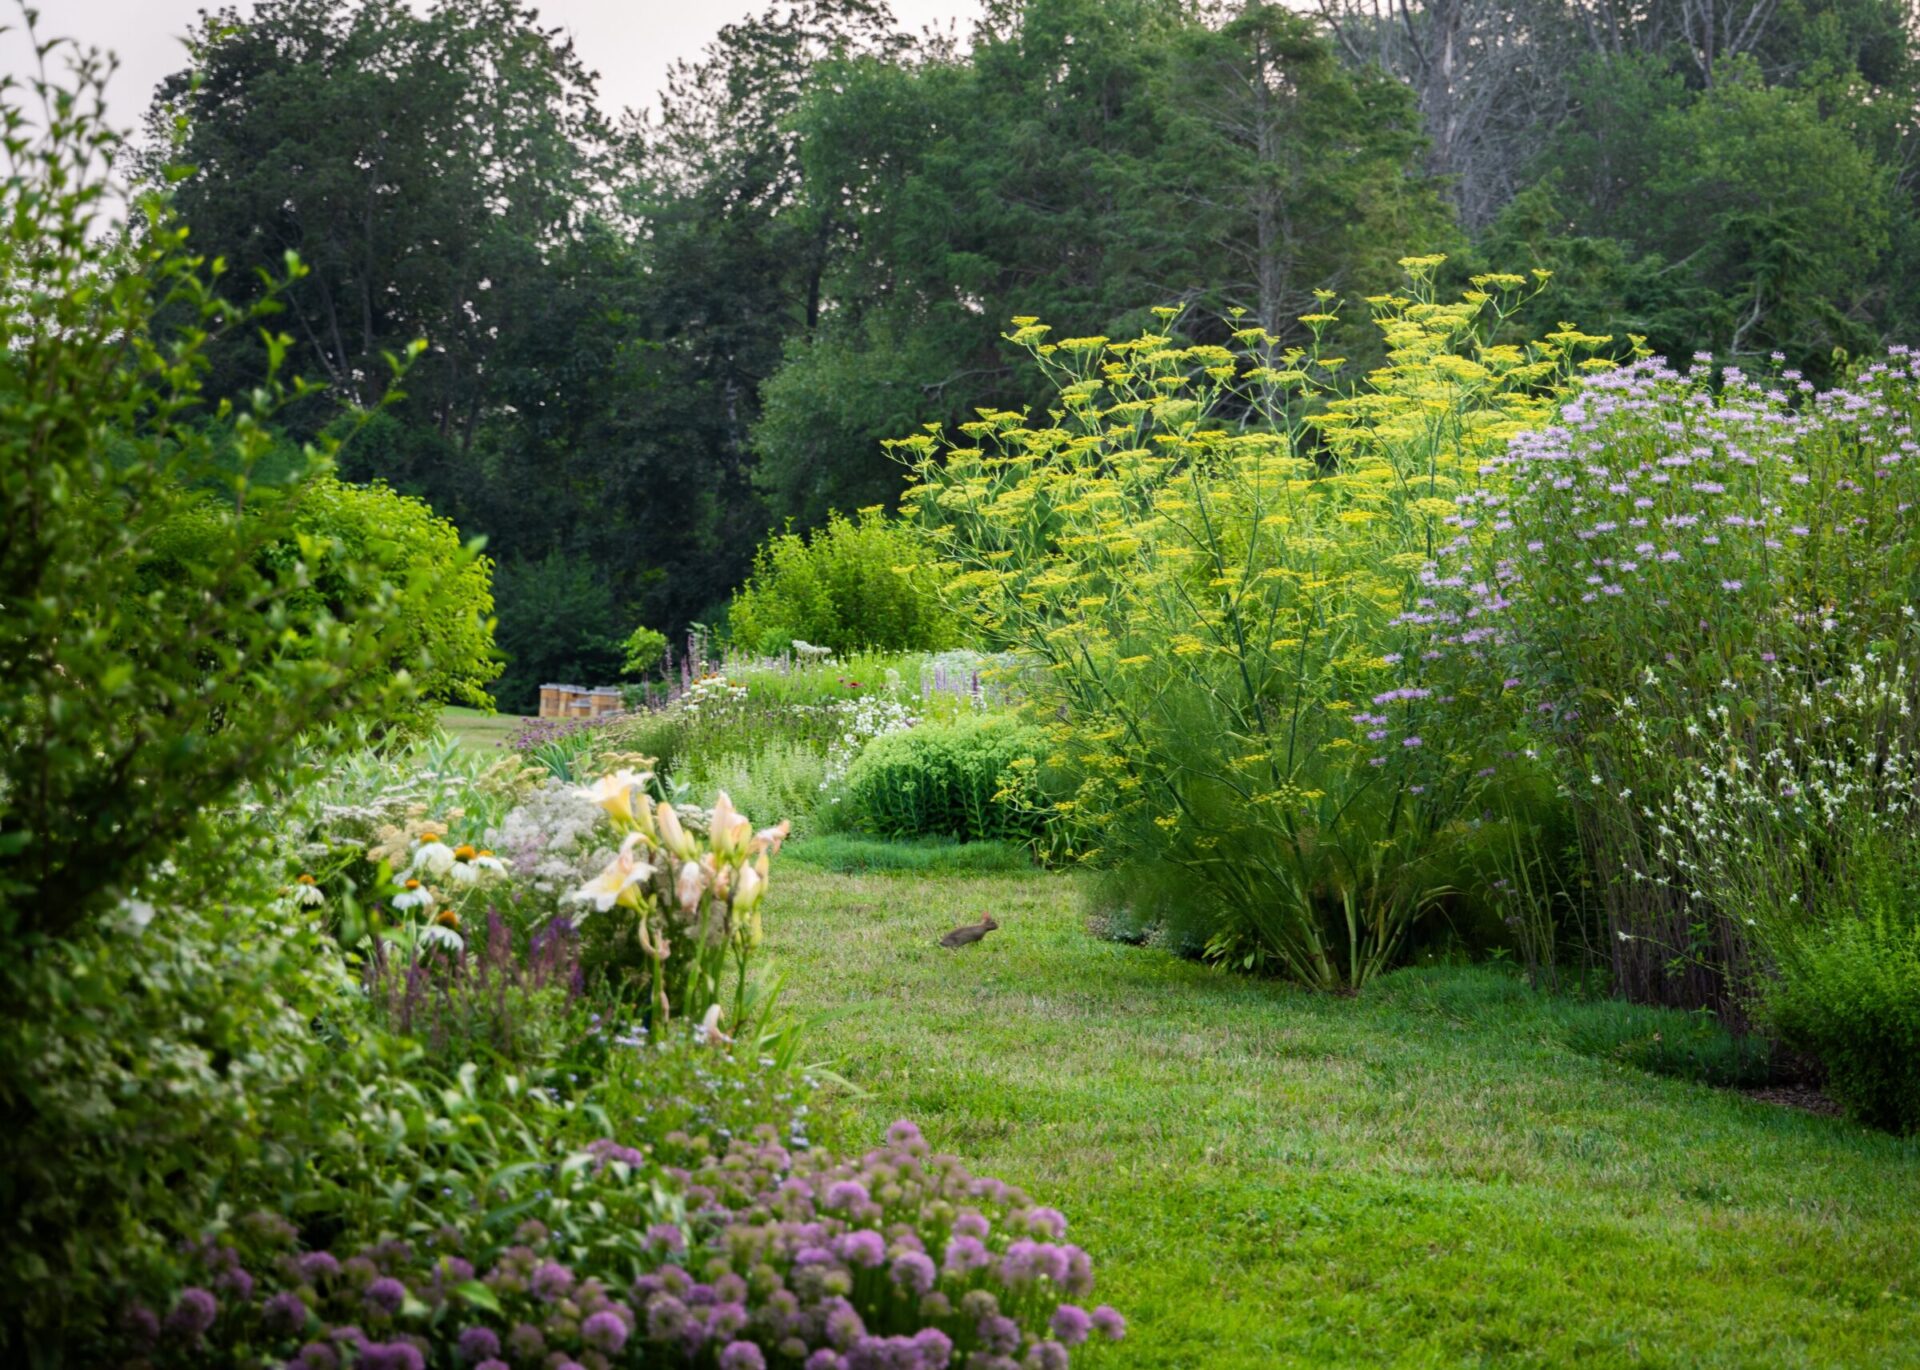 A lush garden with various flowers and plants in bloom, a mowed lawn in the foreground, and dense trees in the background.